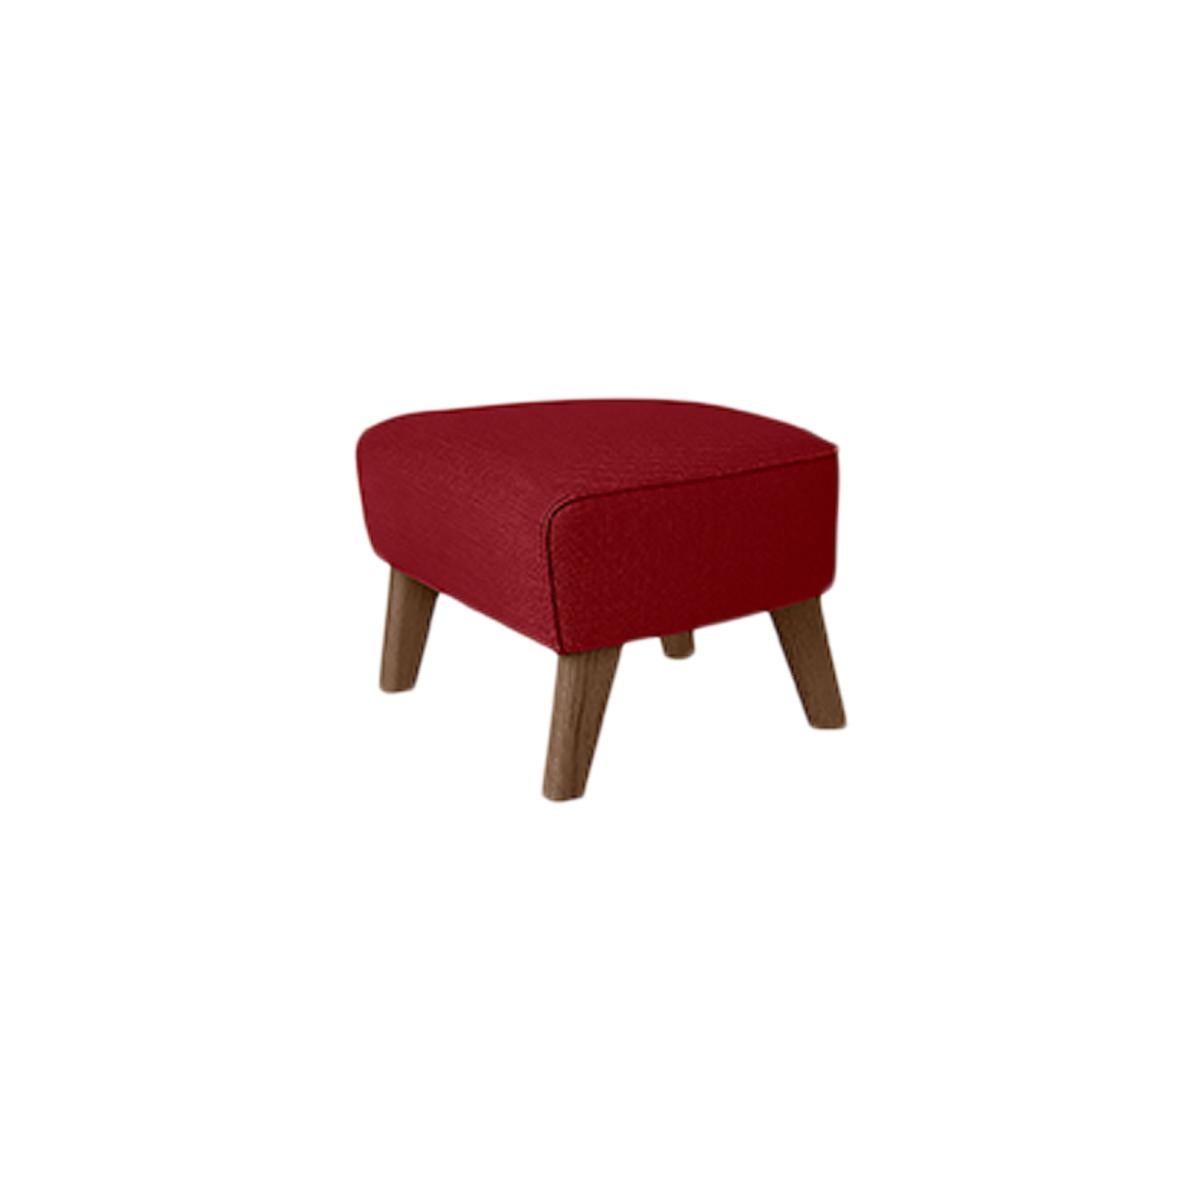 Red and smoked oak Raf Simons Vidar 3 my own chair footstool by Lassen
Dimensions: W 56 x D 58 x H 40 cm 
Materials: Textile
Also Available: Other colors available,

The my own chair footstool has been designed in the same spirit as Flemming